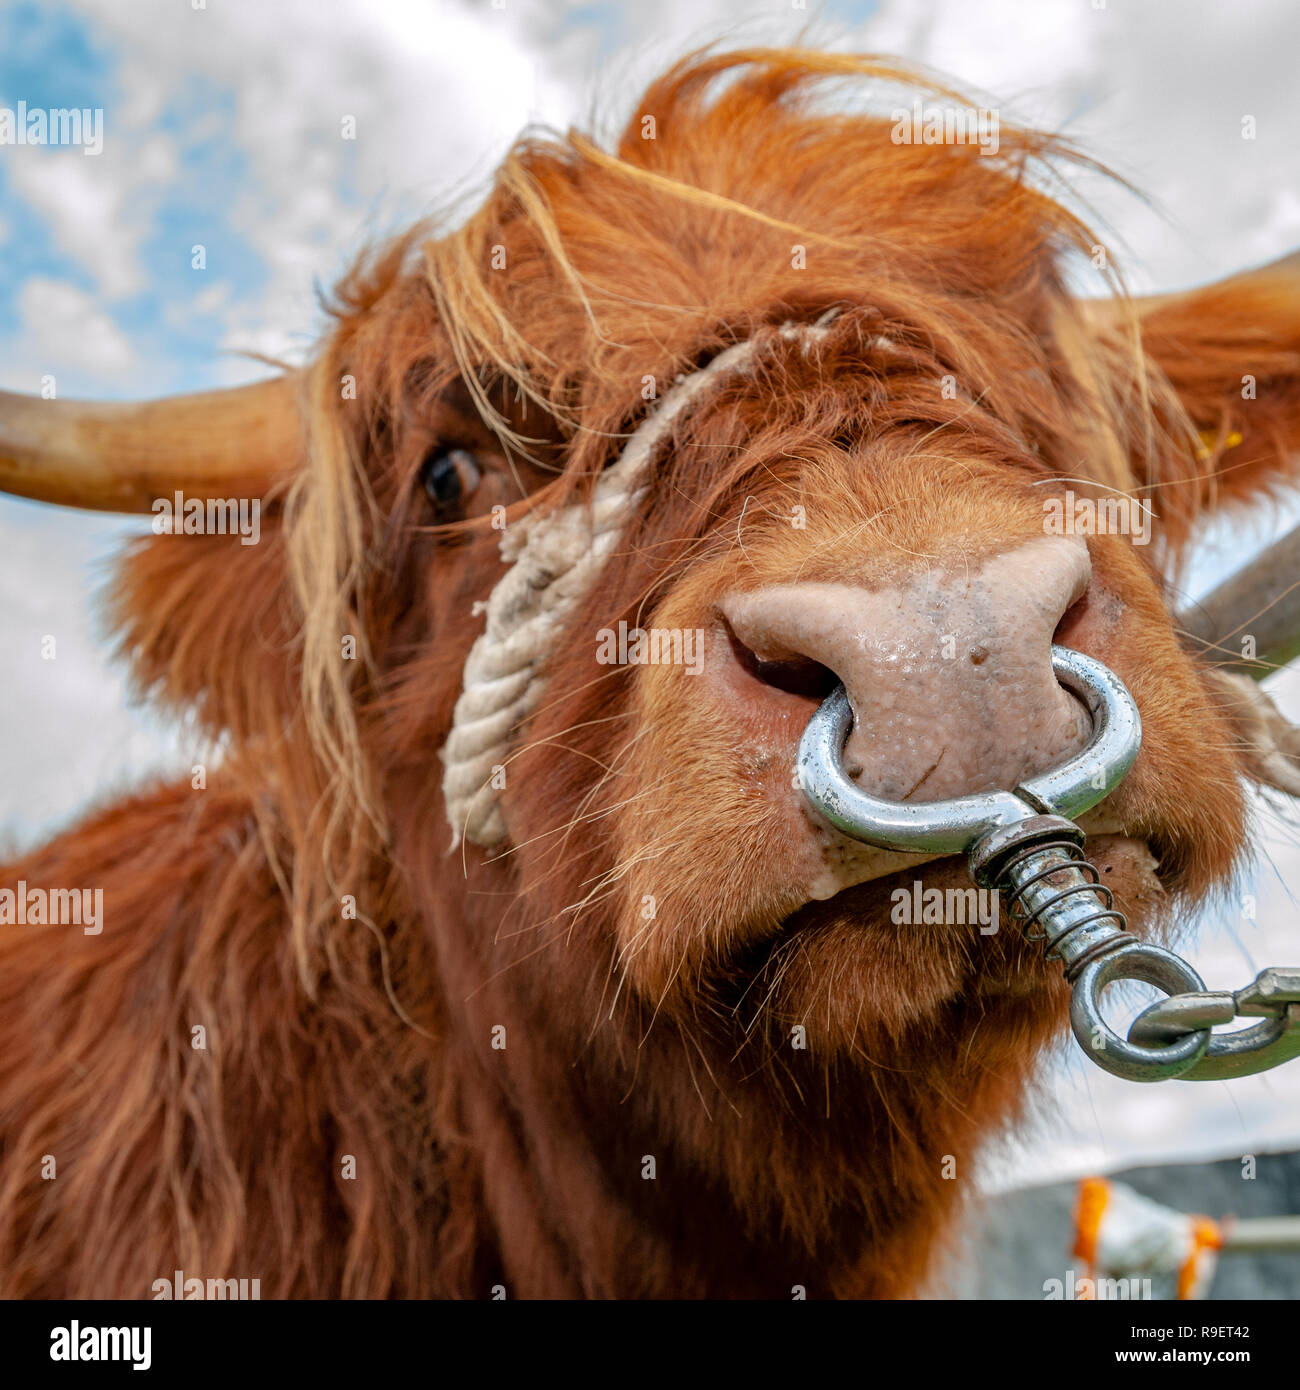 Square format close up bull images Stock Photo